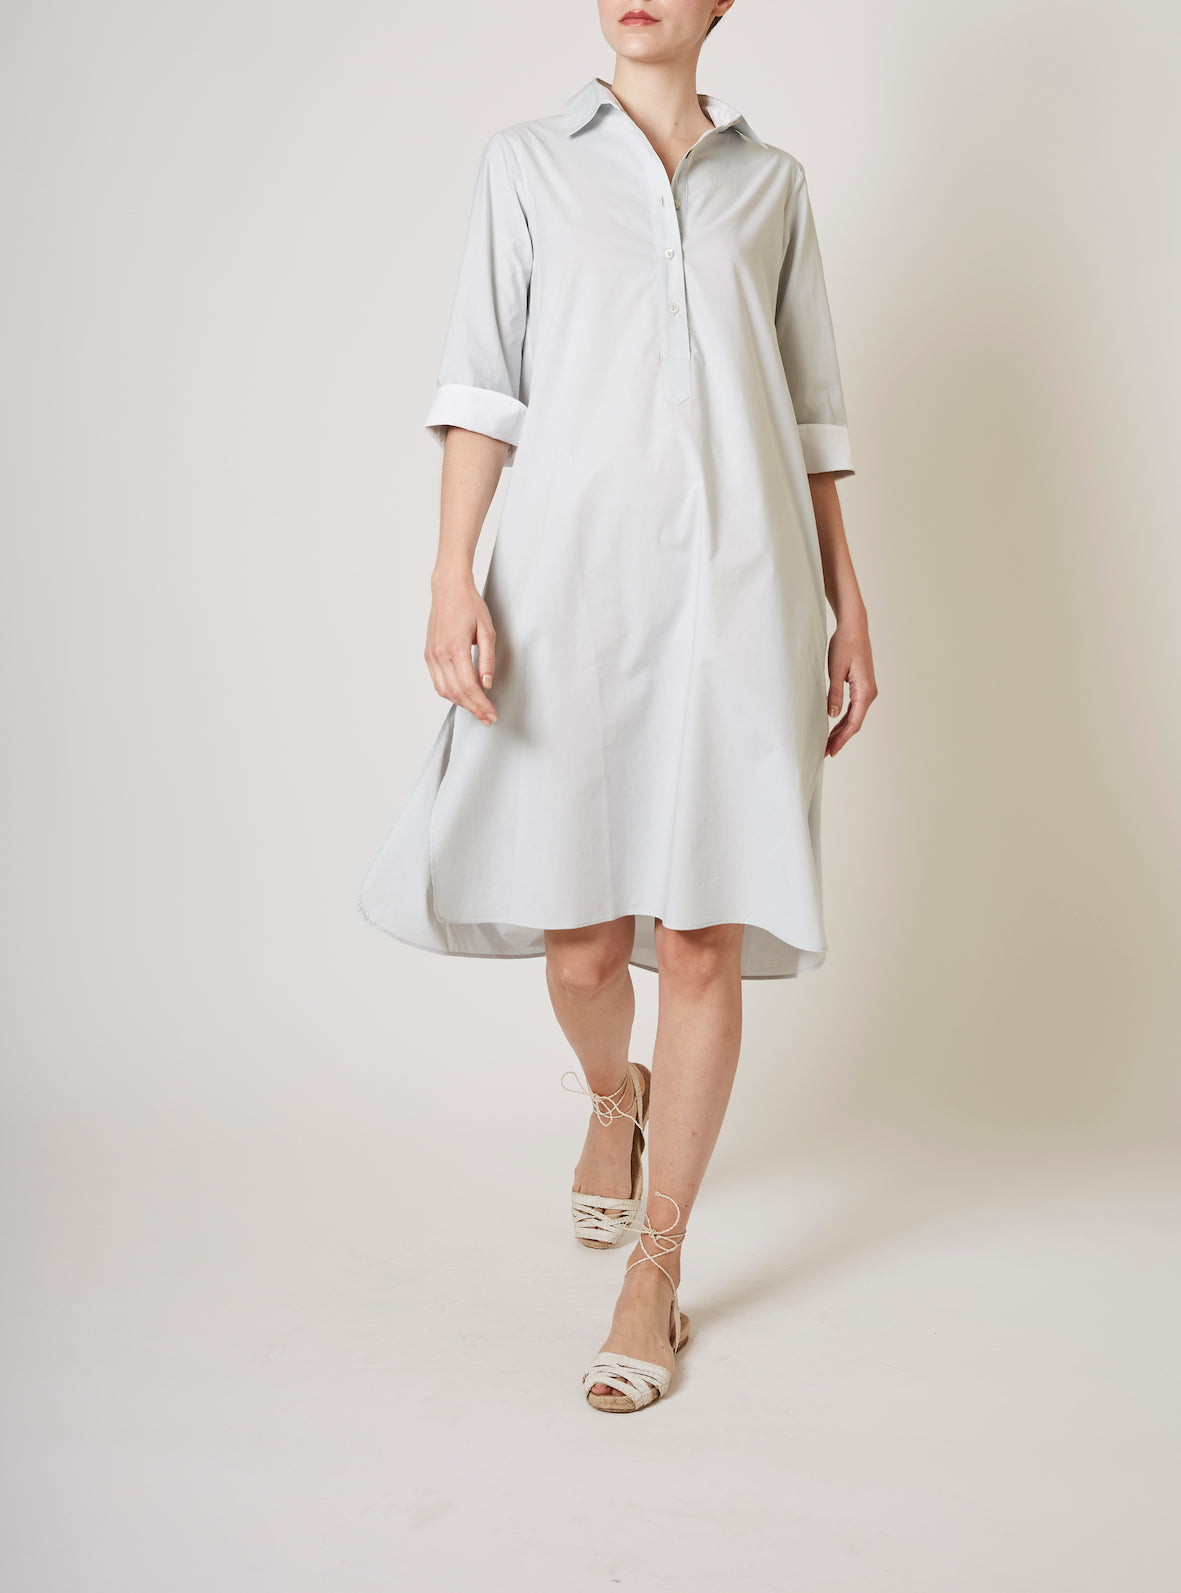 Angelica Pearl grey shirt Dress by Thierry Colson